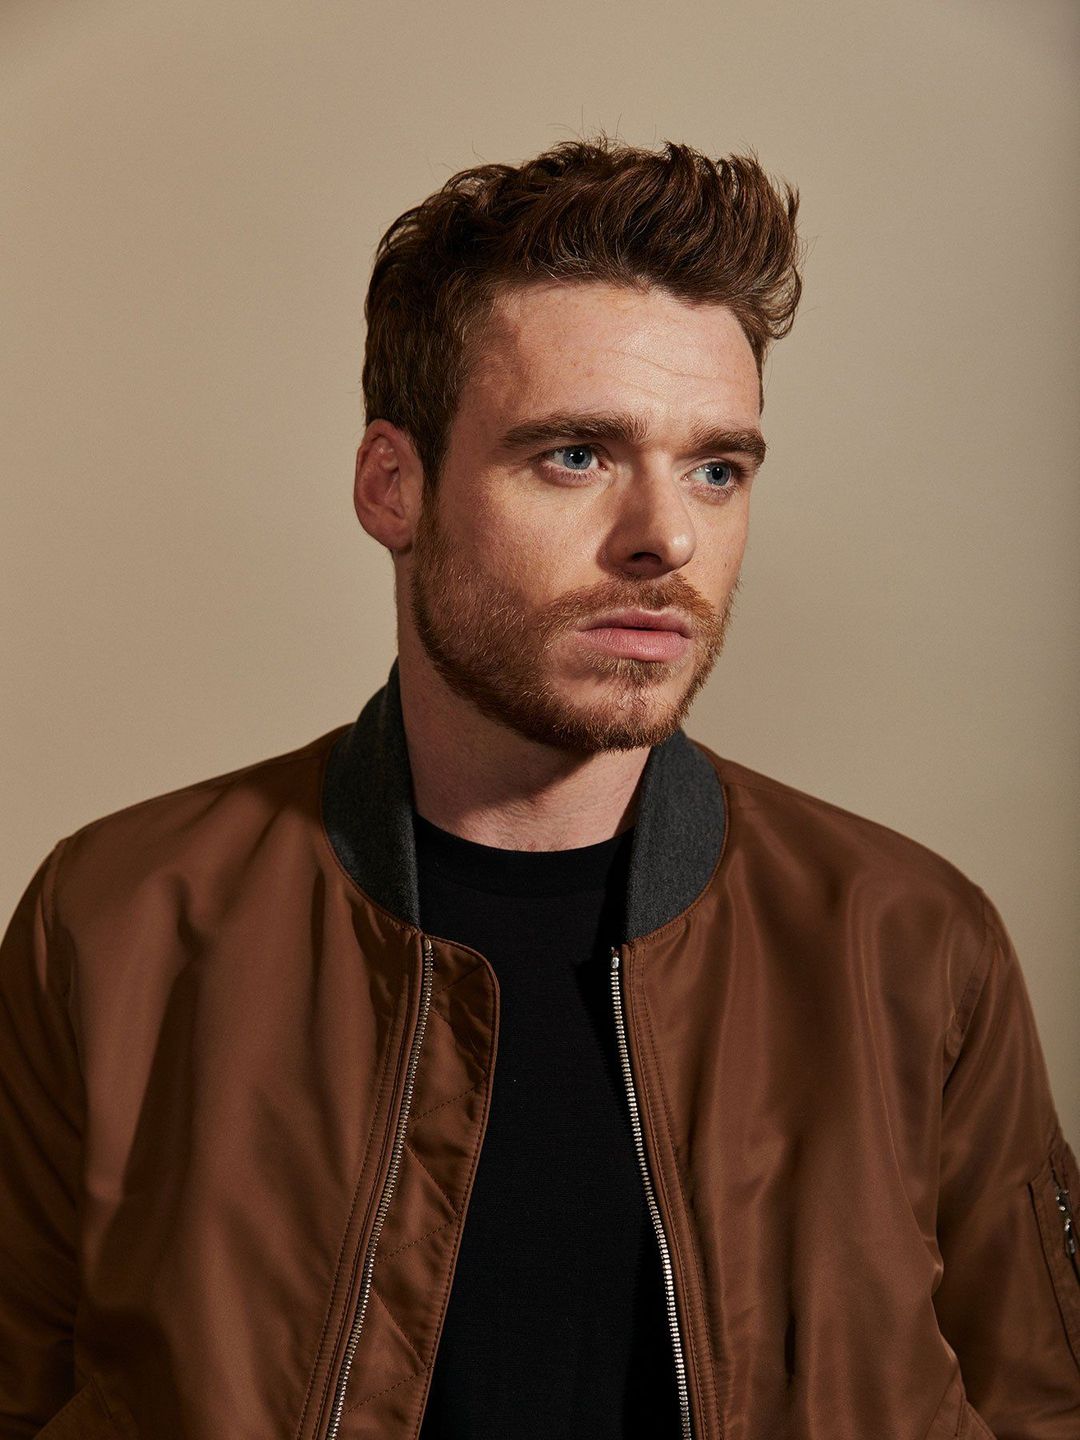 Richard Madden does he have kids